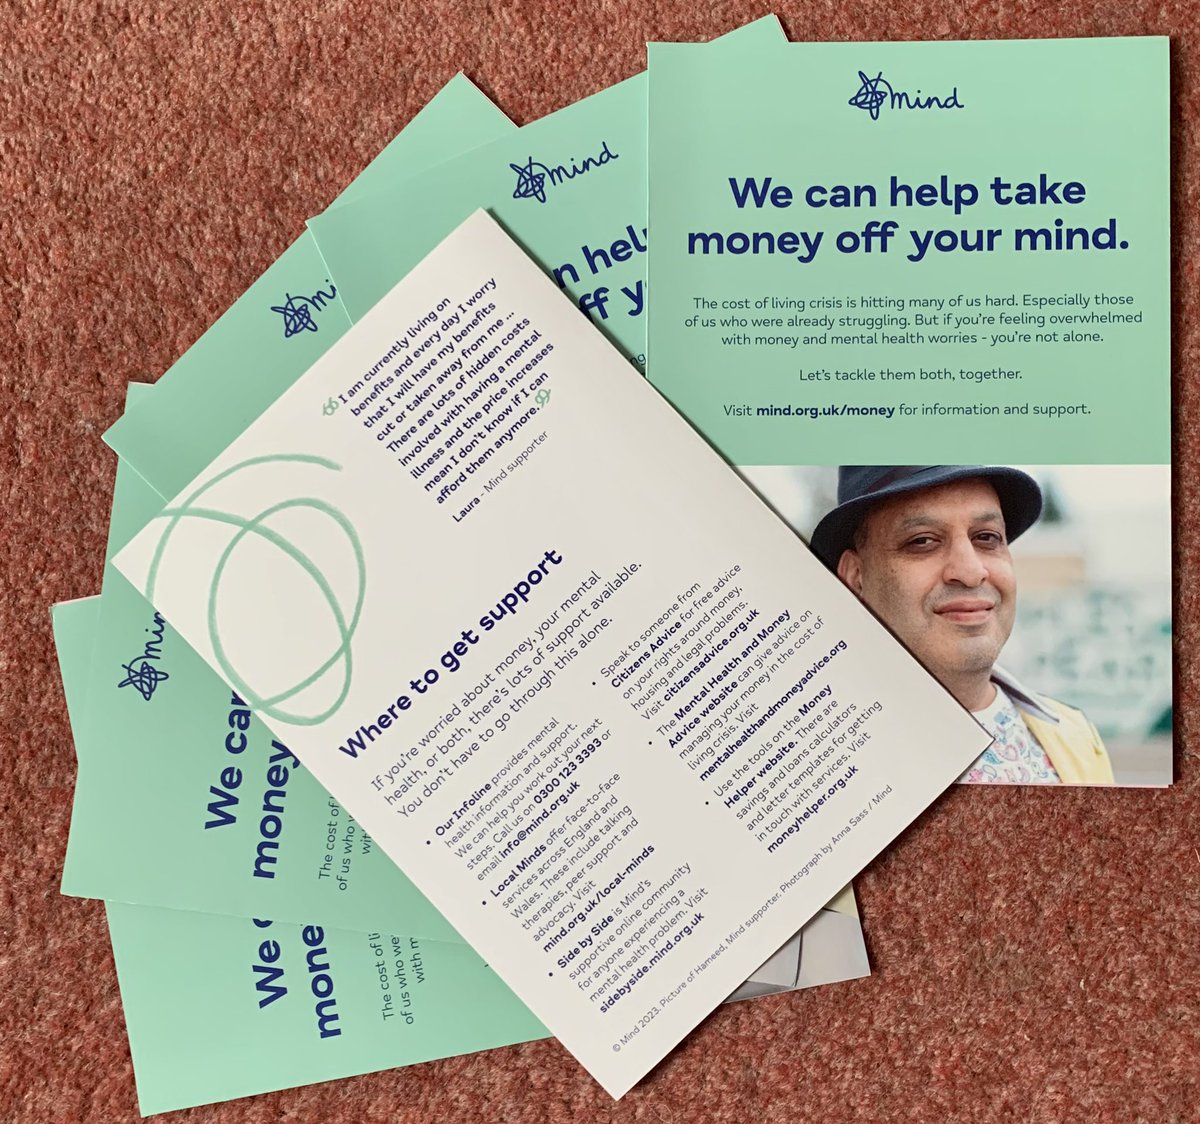 There is help out there if you need it🤍Don’t be afraid to reach out🤍
@MindCharity 
#mentalhealthsupport 
#moneyworries
You are not alone🙏🏼